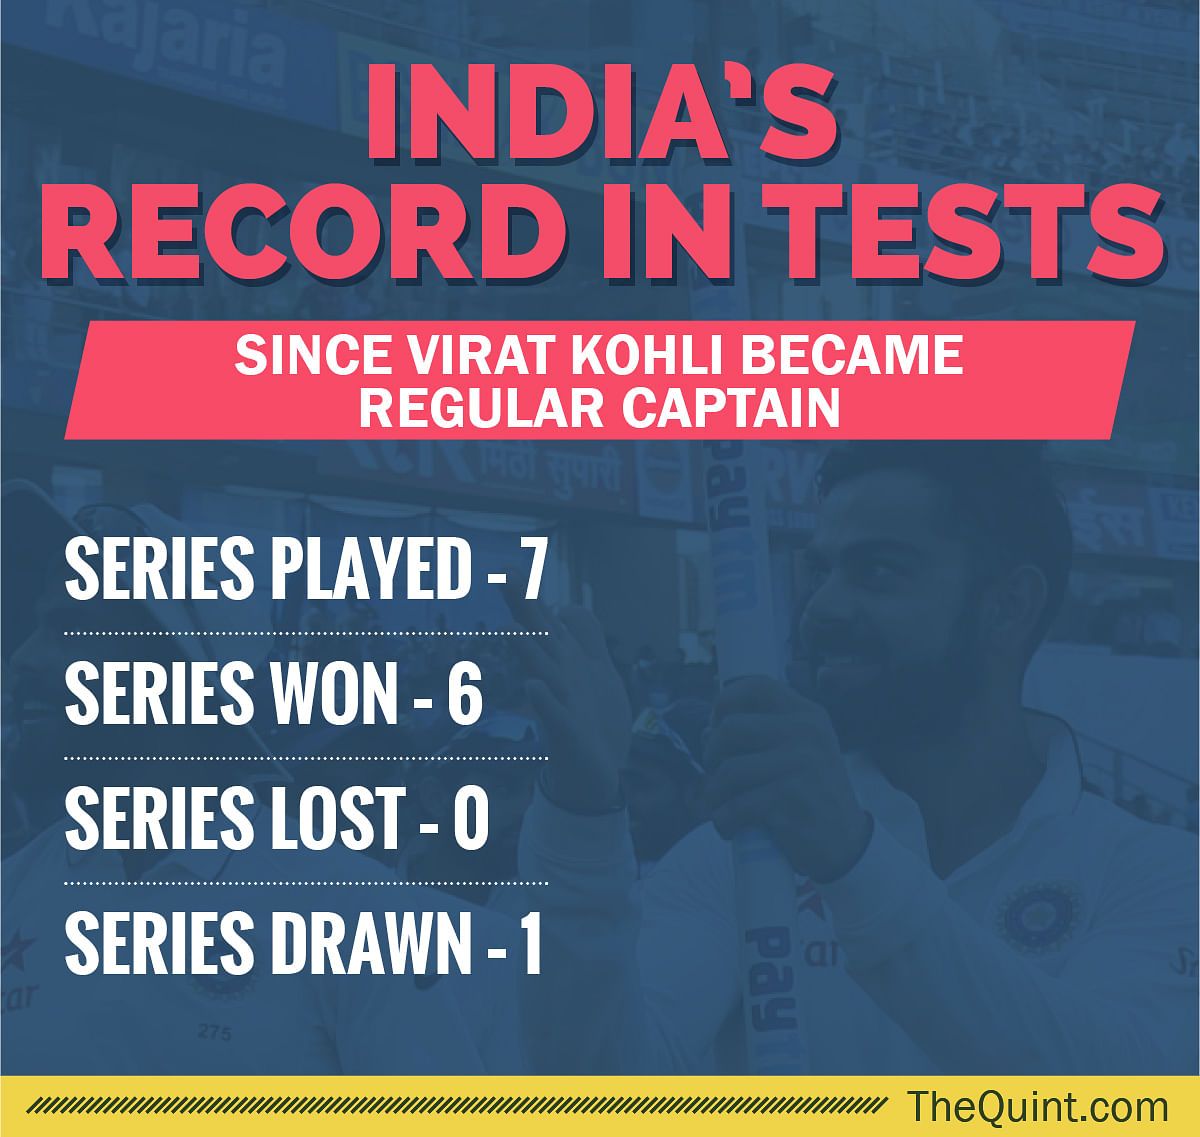 Statistician Arun Gopalakrishnan previews the 4th Test between India and Australia through some interesting numbers.